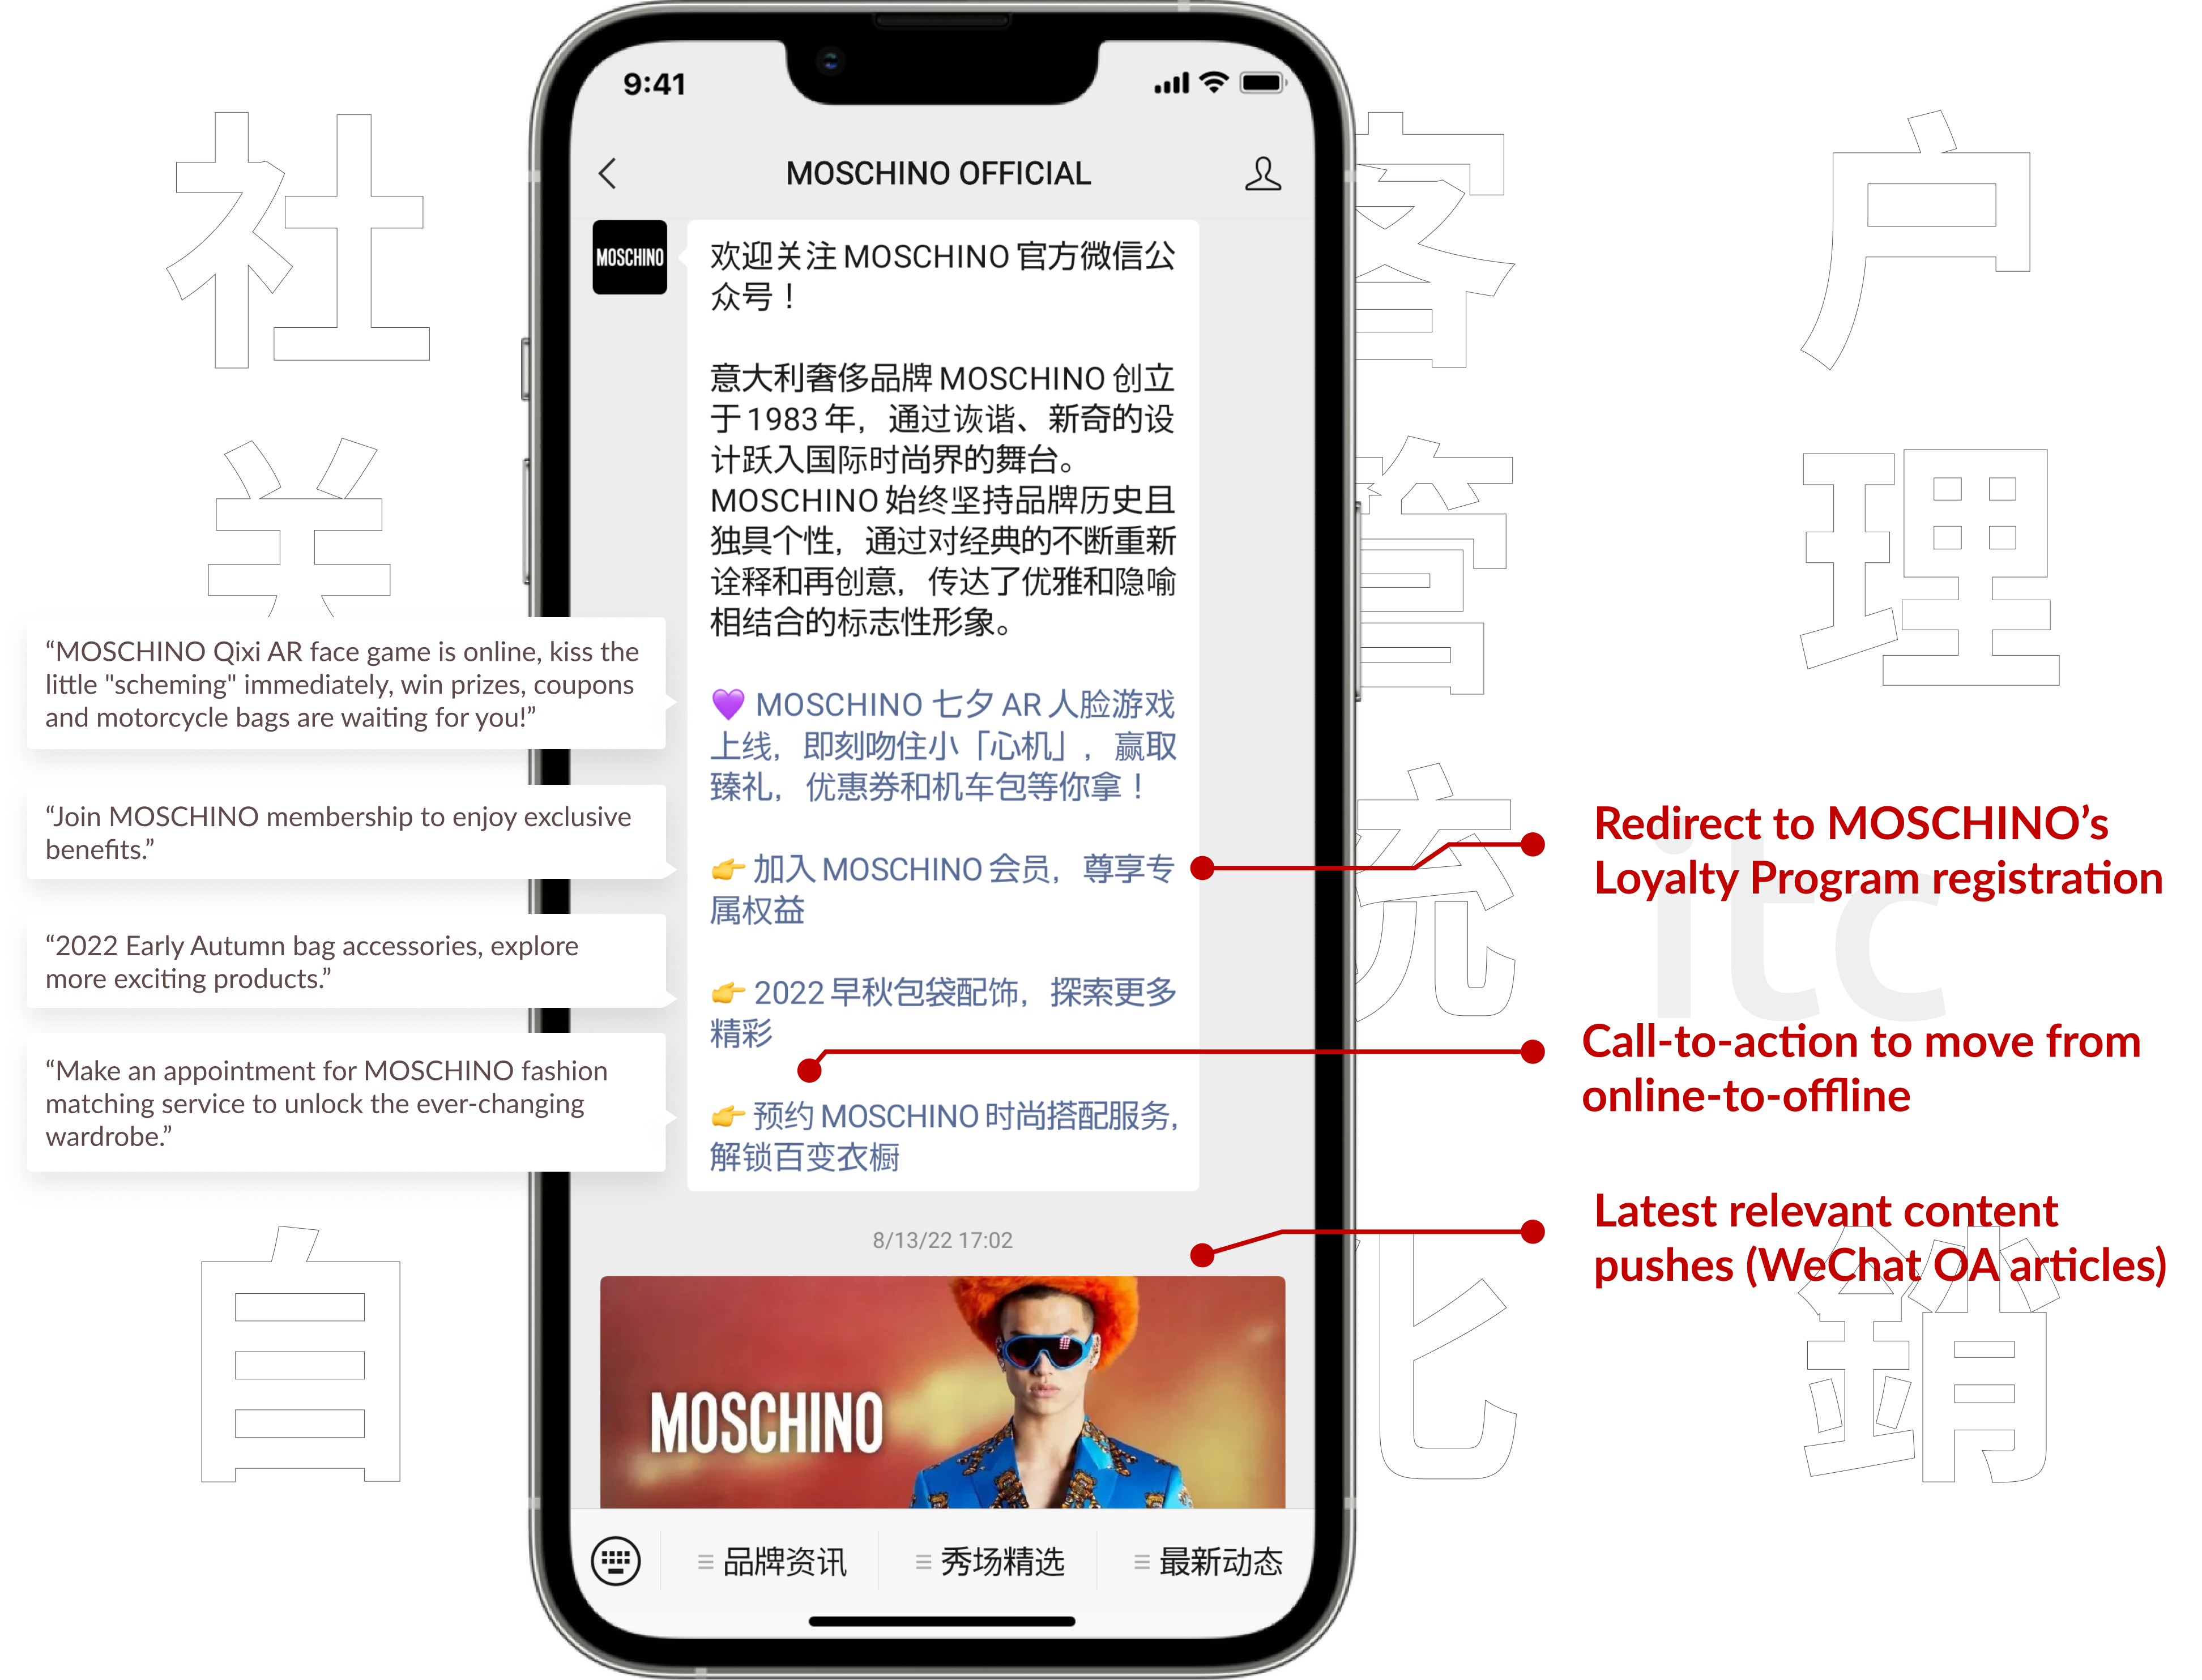 Moschino can leverage marketing automation and social CRM tools to effectively capture data and nurture leads with personalized message/content push via its WeChat Official Account